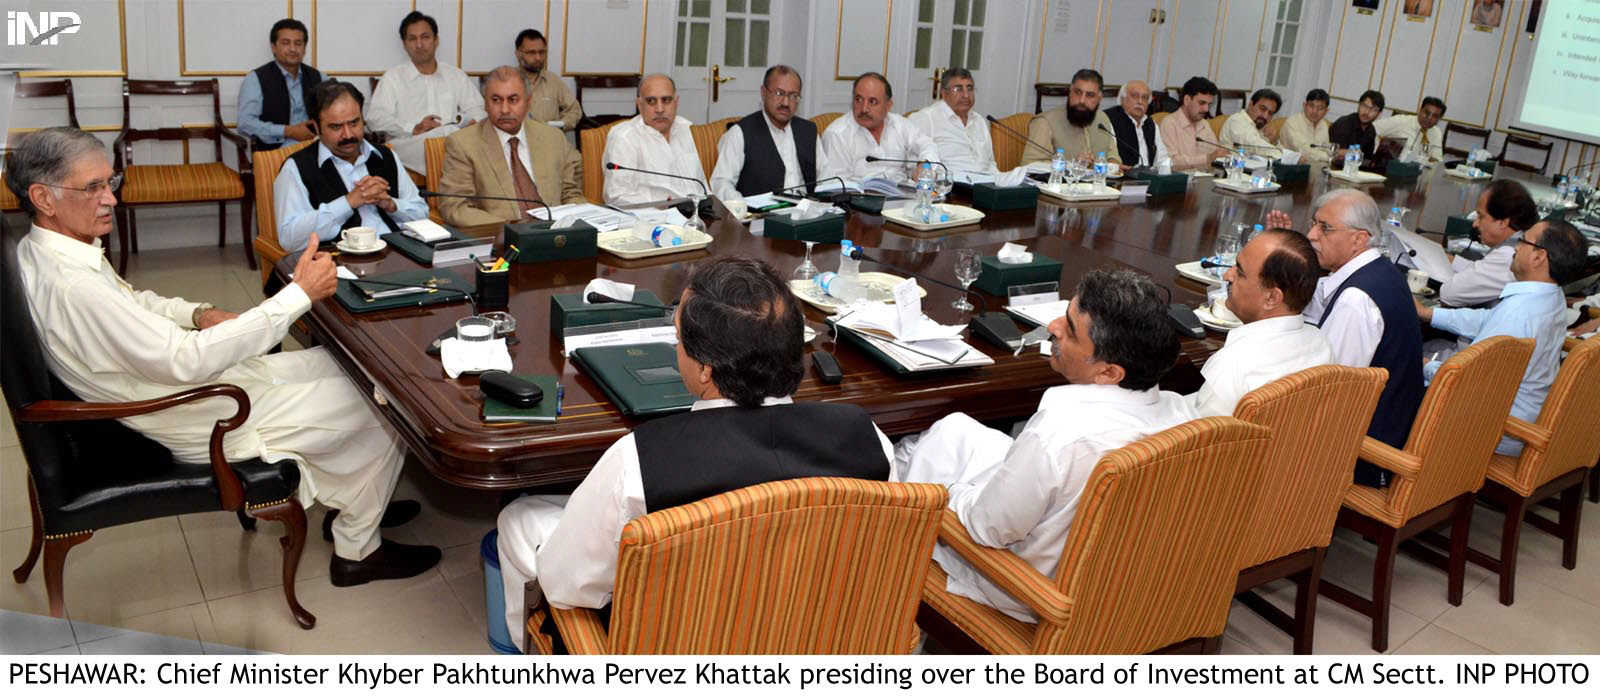 khyber pakhtunkhwa chief minister pervez khattak presiding a board of investment meeting on saturday photo inp